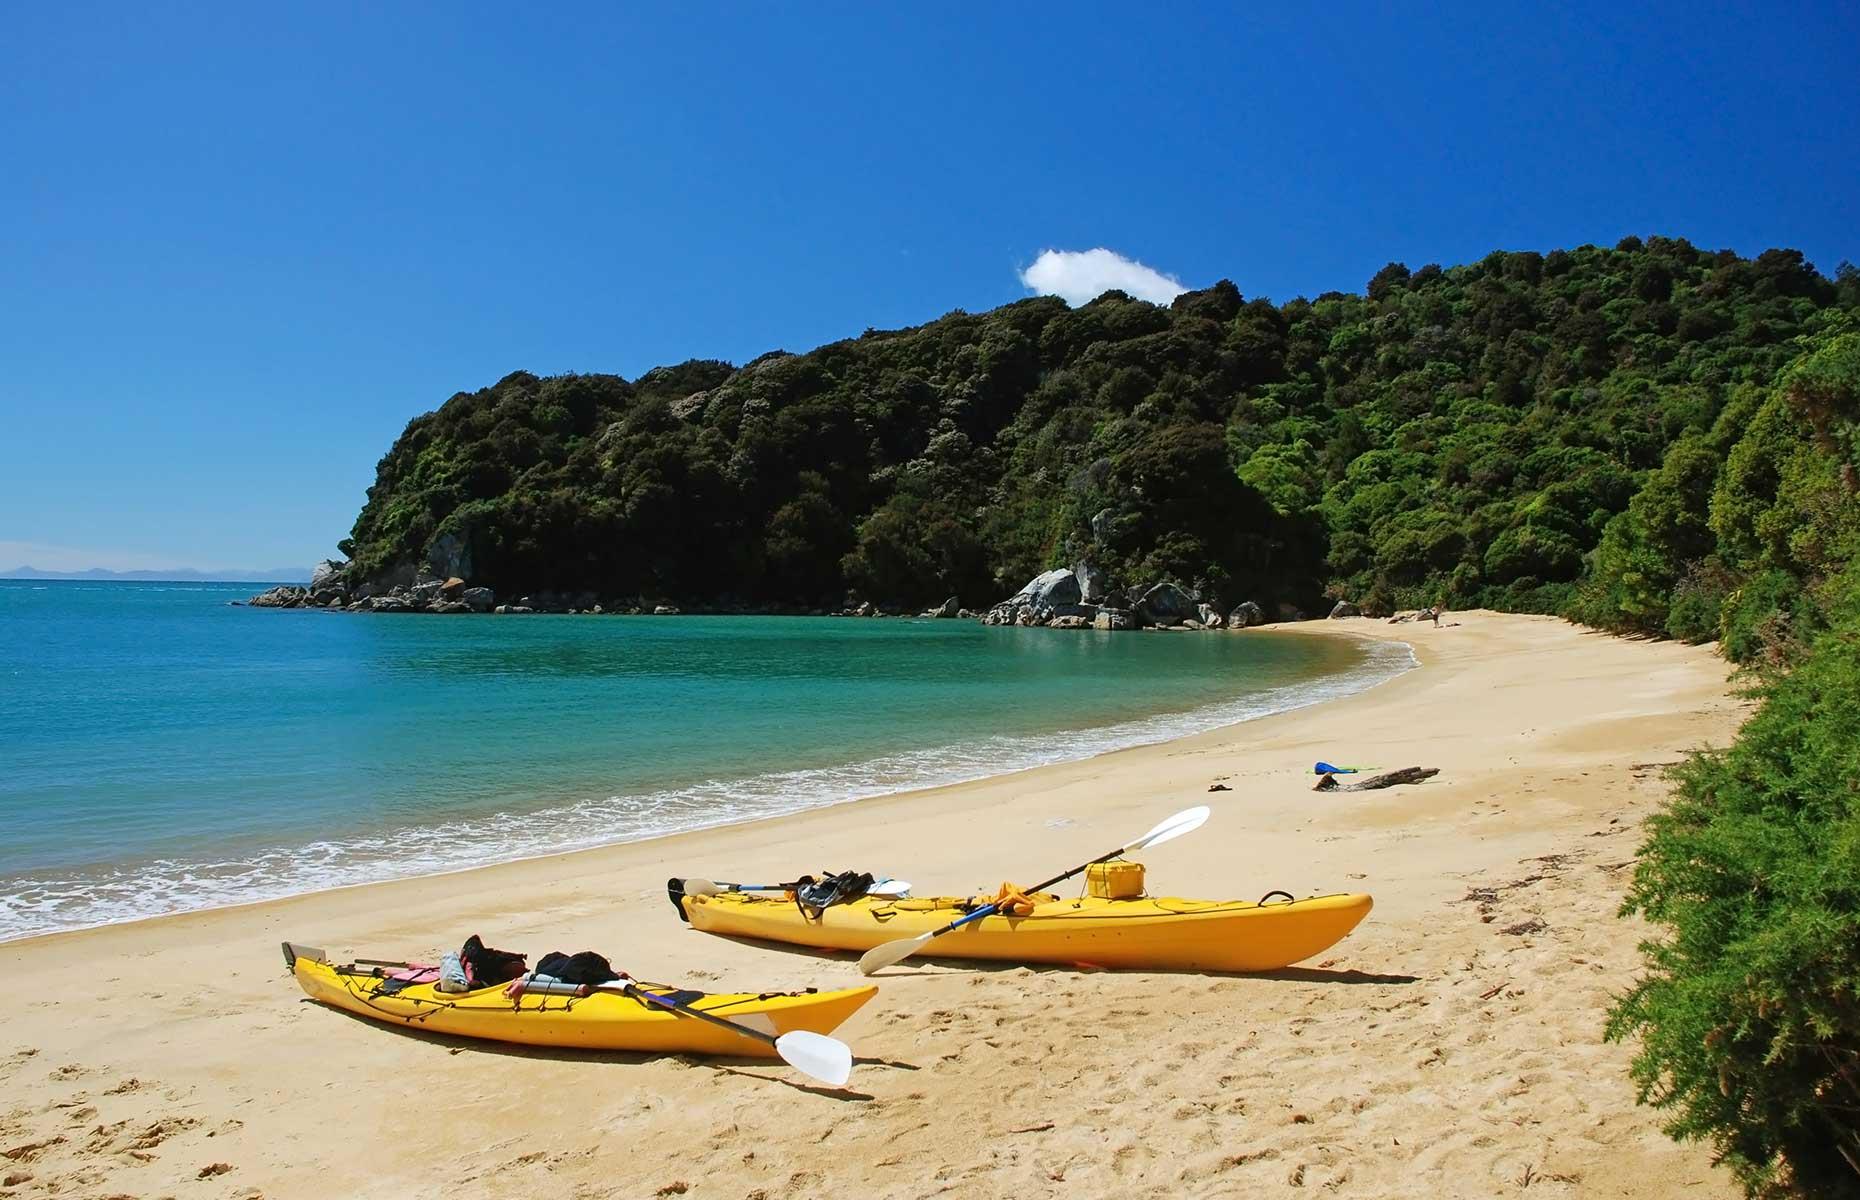 <p>The outstanding coastline of <a href="https://www.newzealand.com/uk/feature/national-parks-abel-tasman/">Abel Tasman National Park</a> is the main reason to visit and paddling the picturesque islets and islands is an unmissable experience. From a kayak, you’re able to access secluded golden sand beaches that can’t be reached on foot. This might be the country's smallest national park, but it's perfectly formed for fabulous adventures that are not too strenuous. </p>